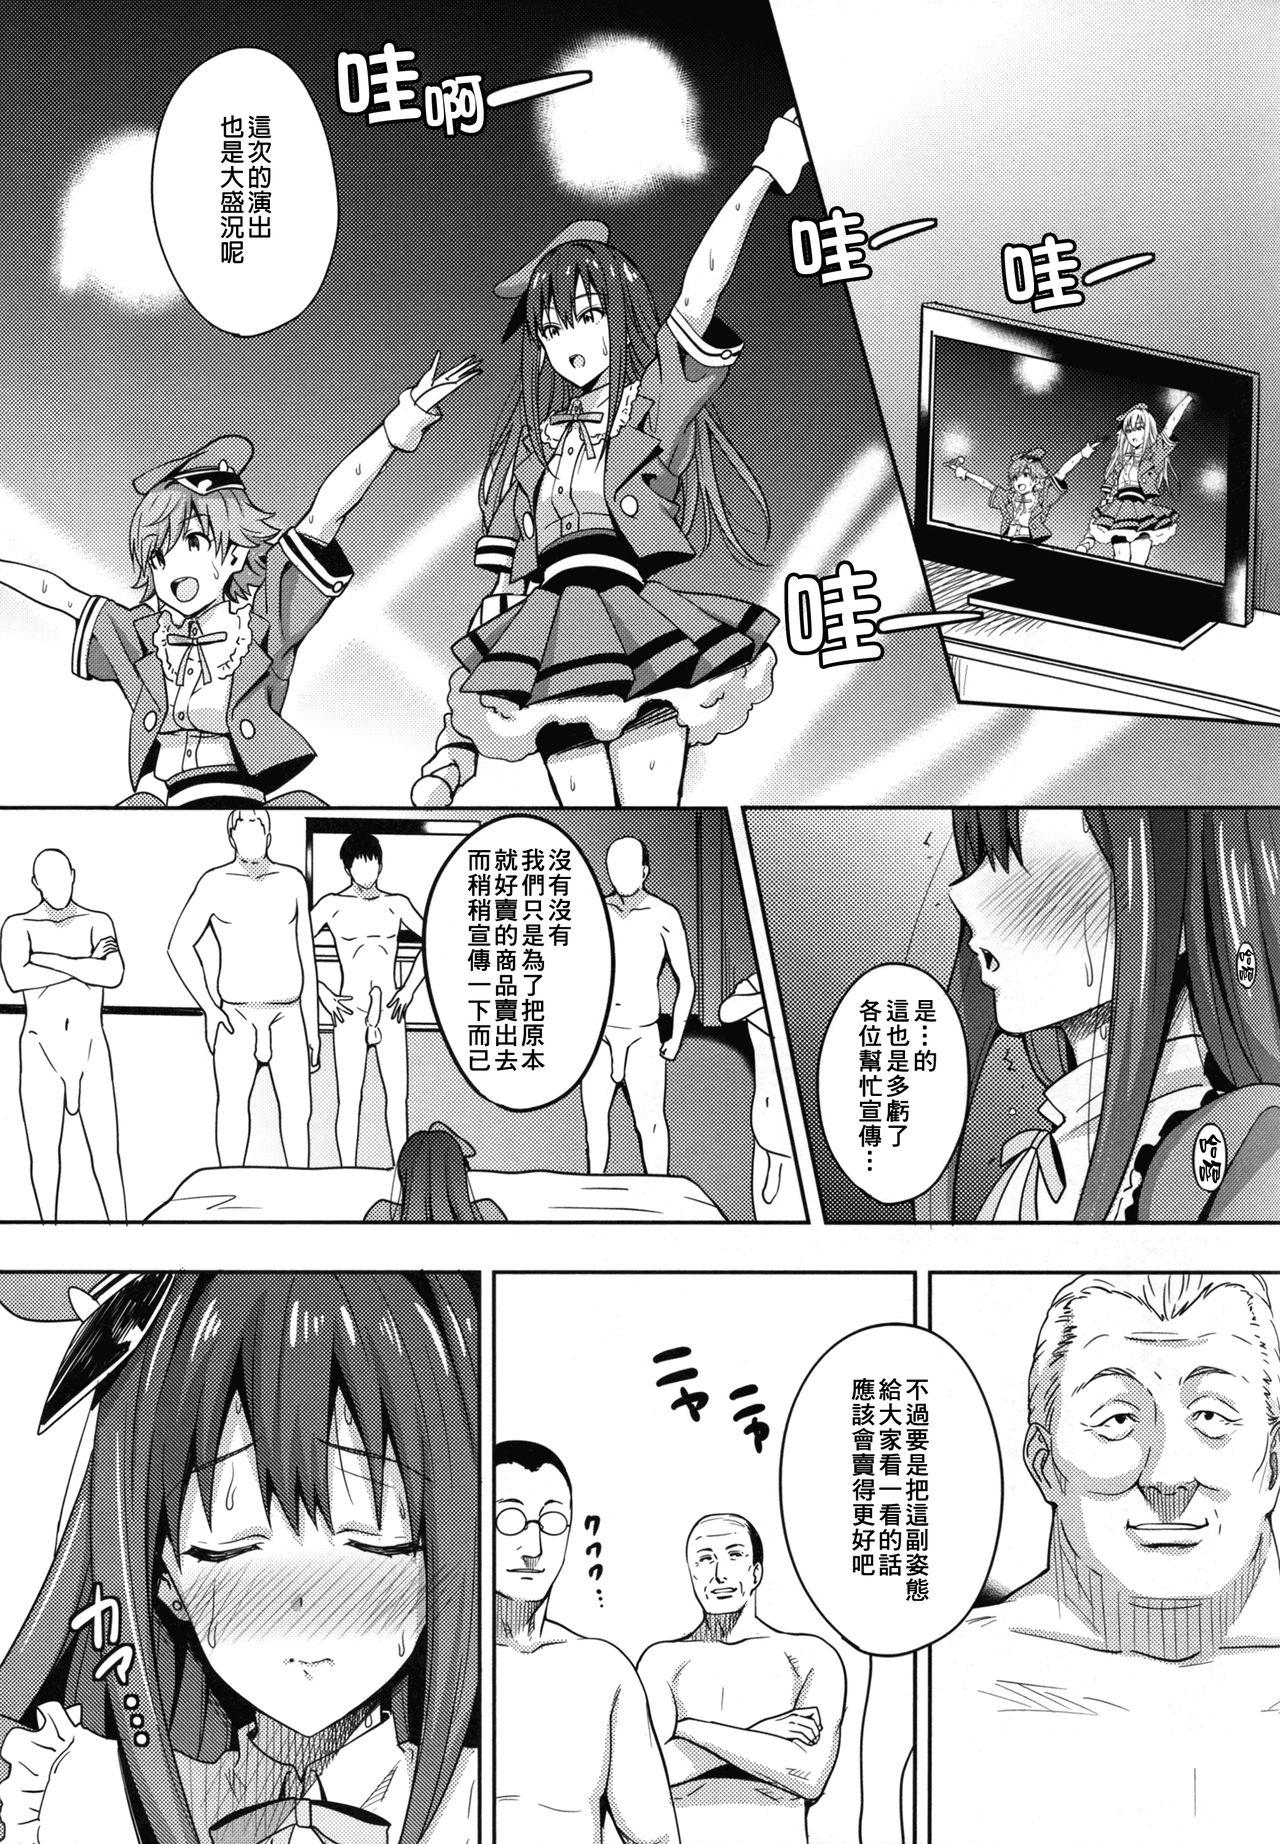 Perfect Body Porn Cinderella Story - The idolmaster Tied - Page 5